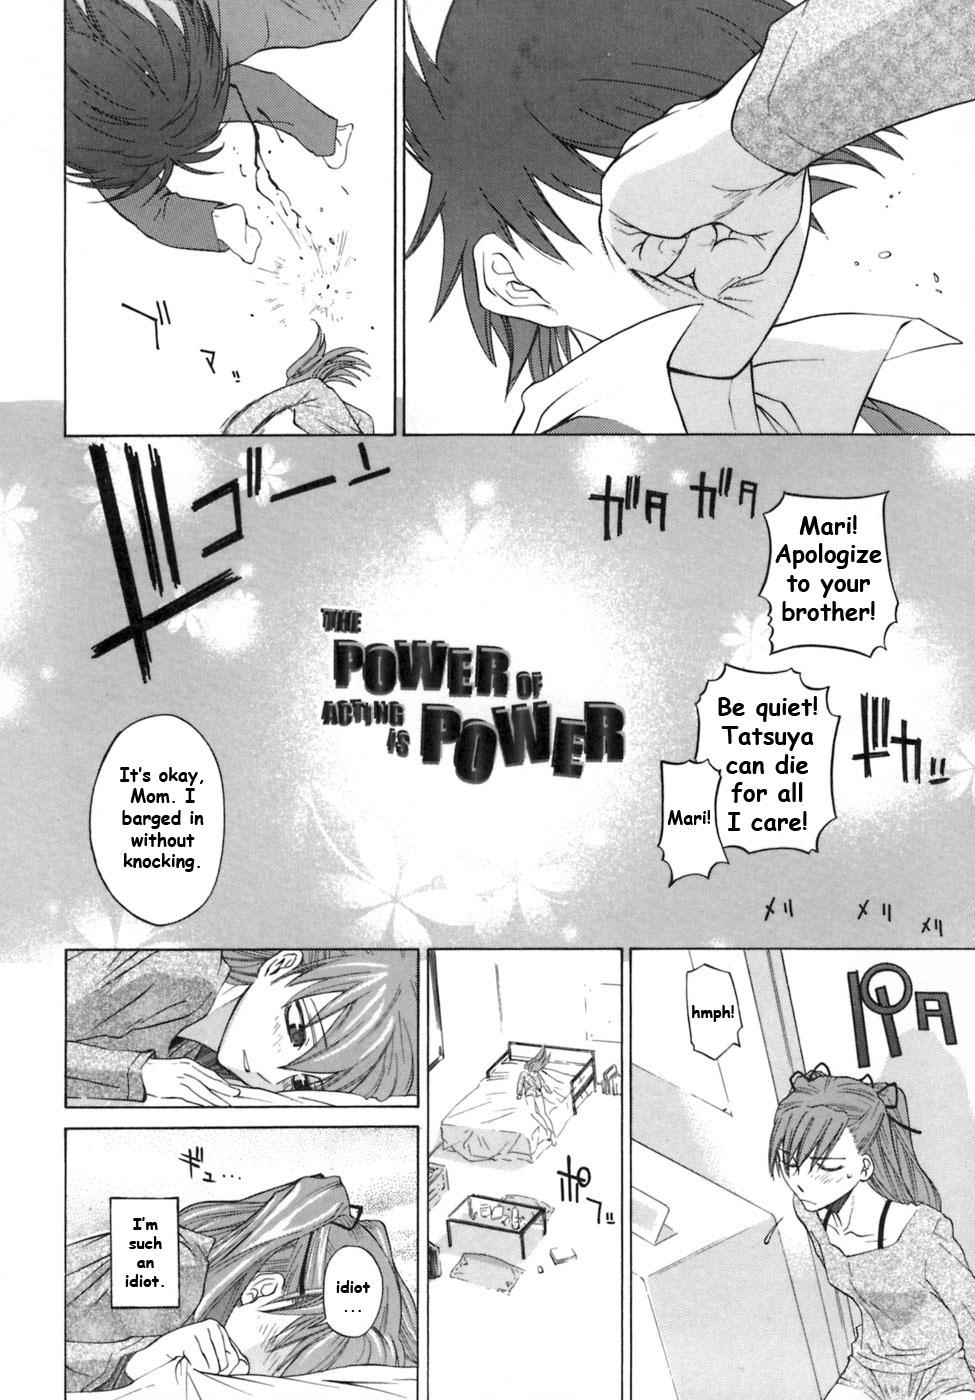 Cdmx The Power of Acting is Power - Ootsuka Kotora Fit - Page 6